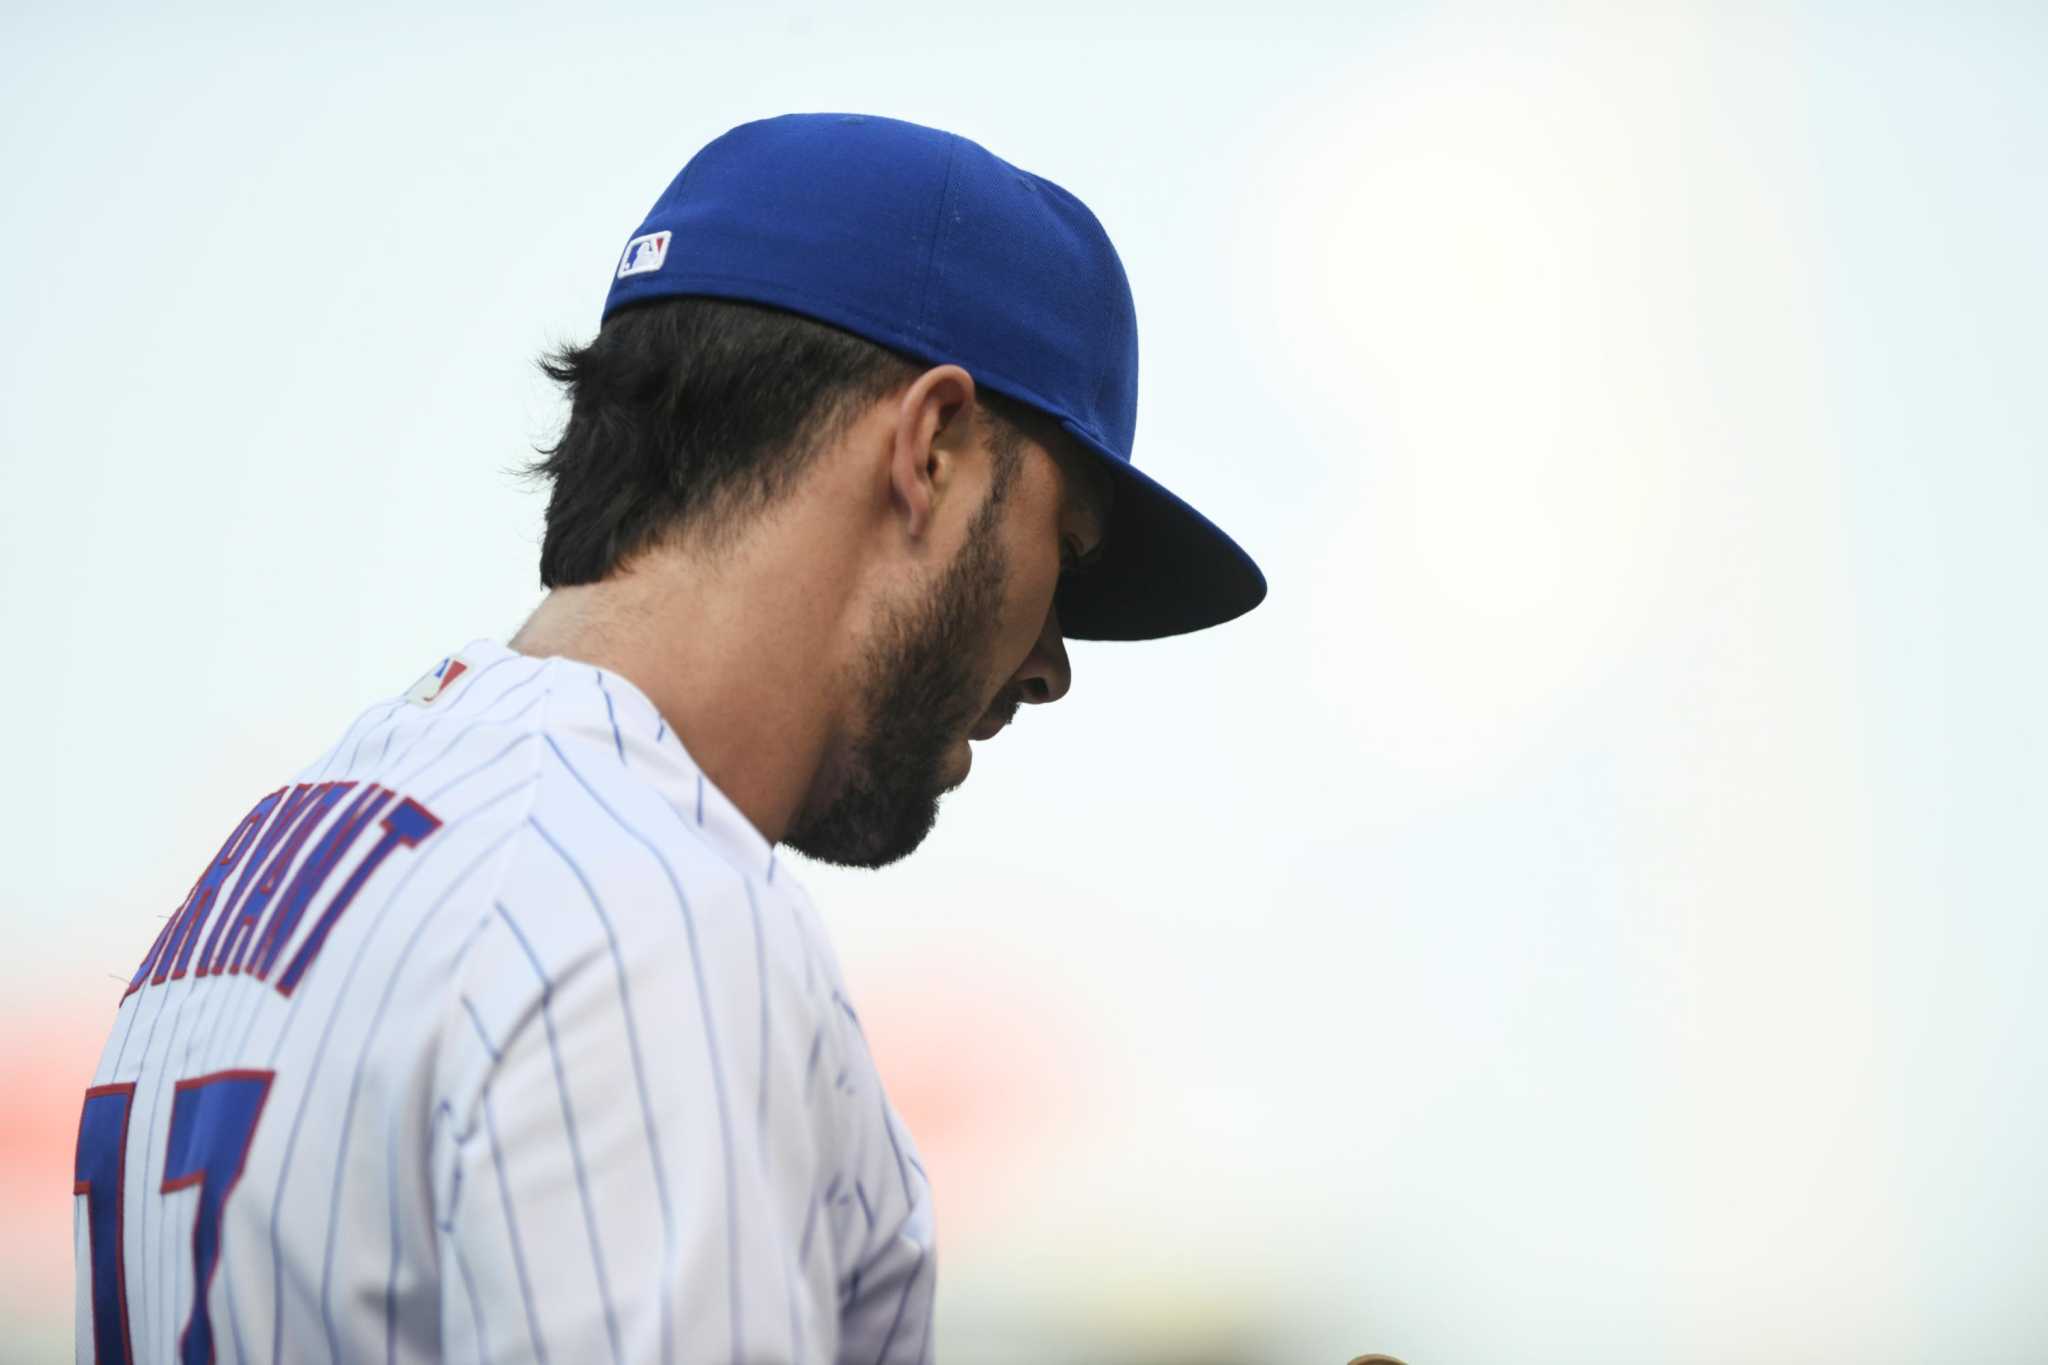 Trade deadline: Why Cubs' Anthony Rizzo, Kris Bryant out of lineup